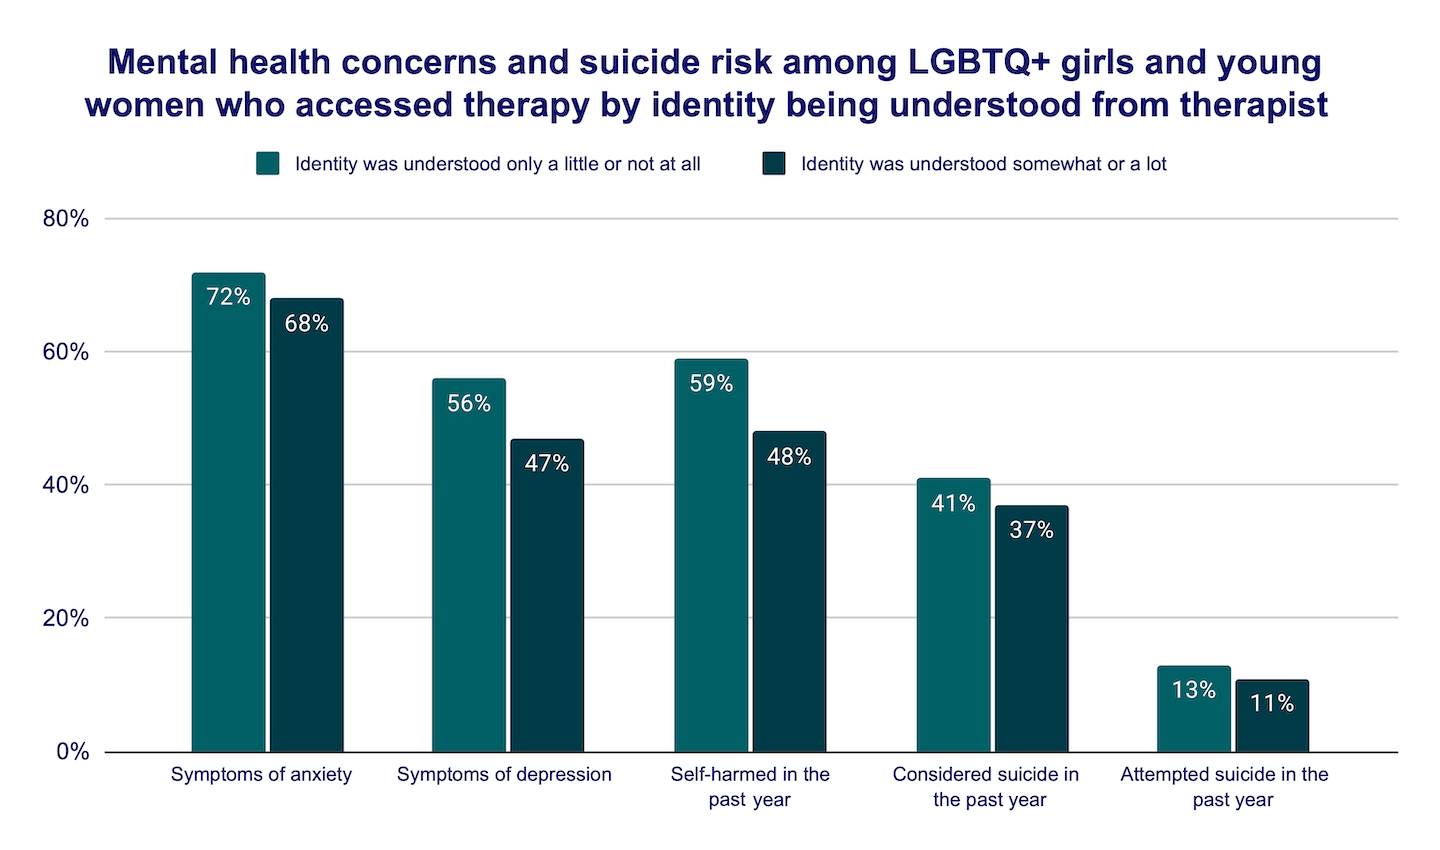 Mental-health-concerns-and-suicide-risk-among-LGBTQ-girls-and-young-women-who-accessed-therapy-by-identity-being-understood-from-therapist Graph